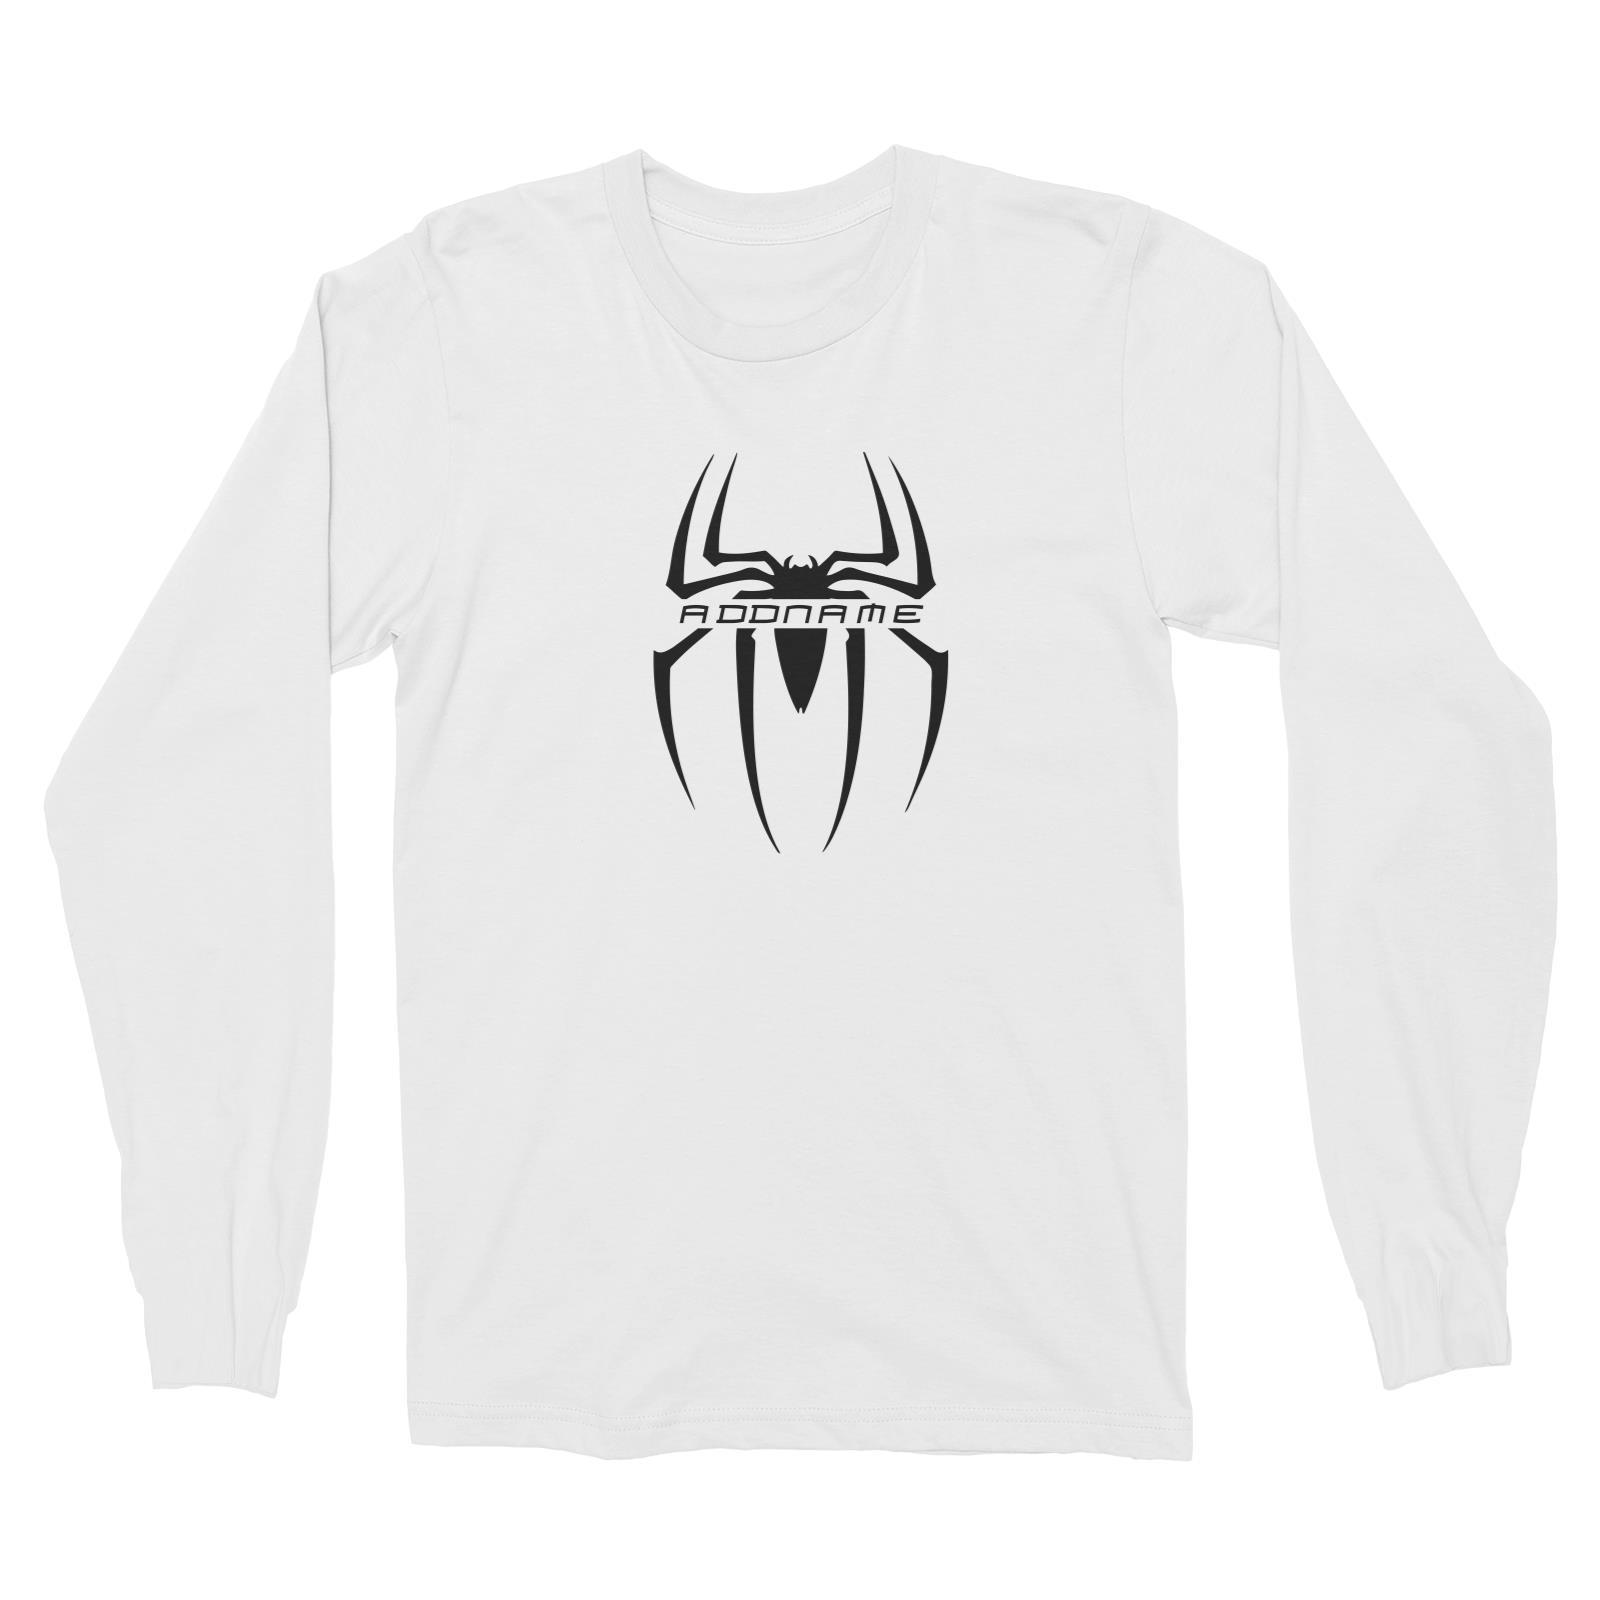 Superhero Spiderman Addname Long Sleeve Unisex T-Shirt  Matching Family Personalizable Designs